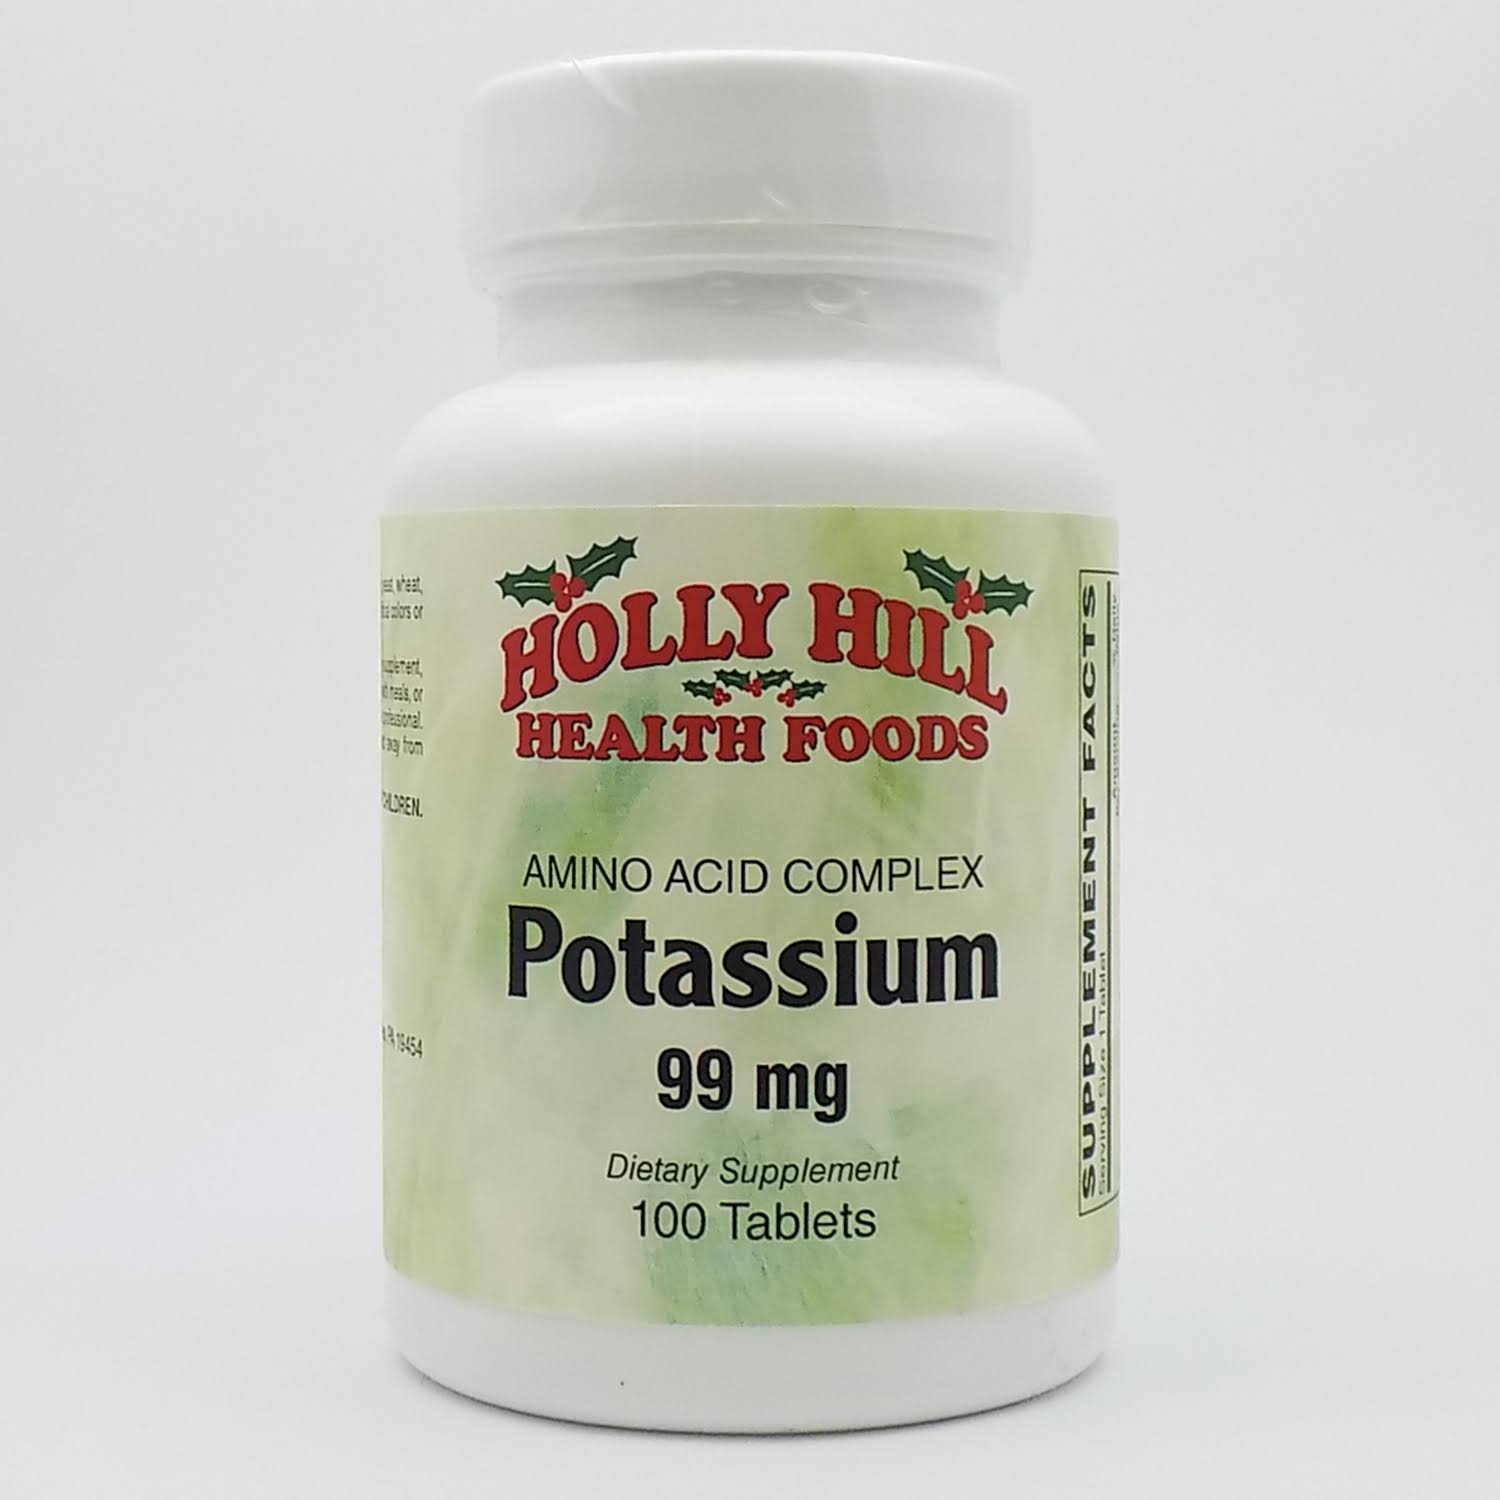 Holly Hill Health Foods, Potassium 99 mg, 100 Tablets